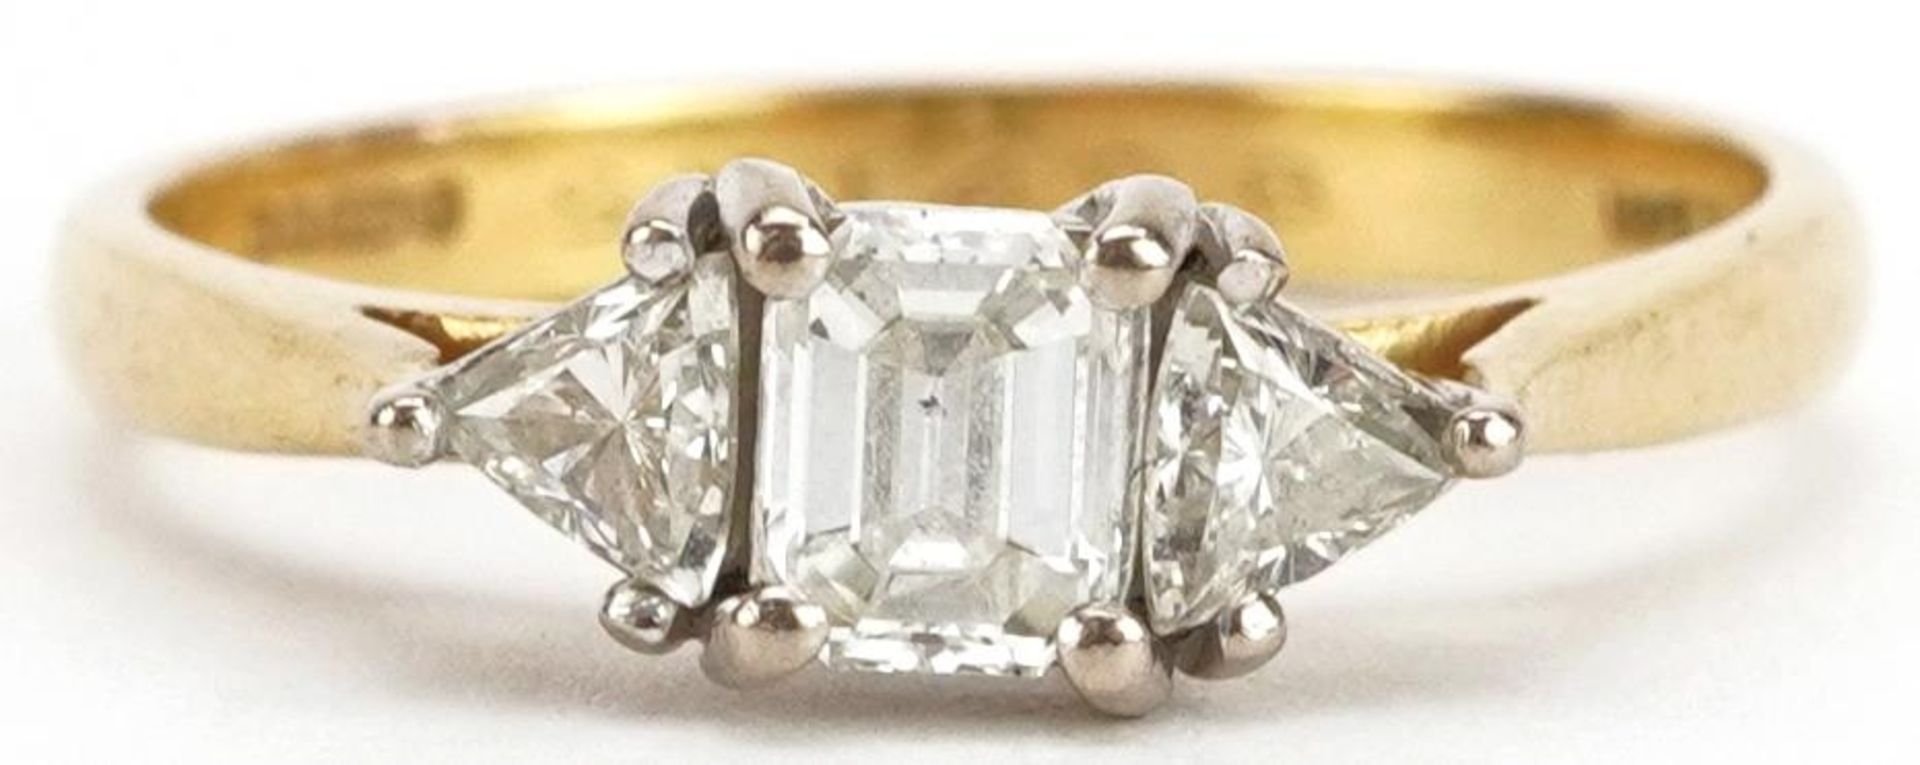 18ct gold diamond three stone ring, total diamond weight approximately 0.68 carat, the central